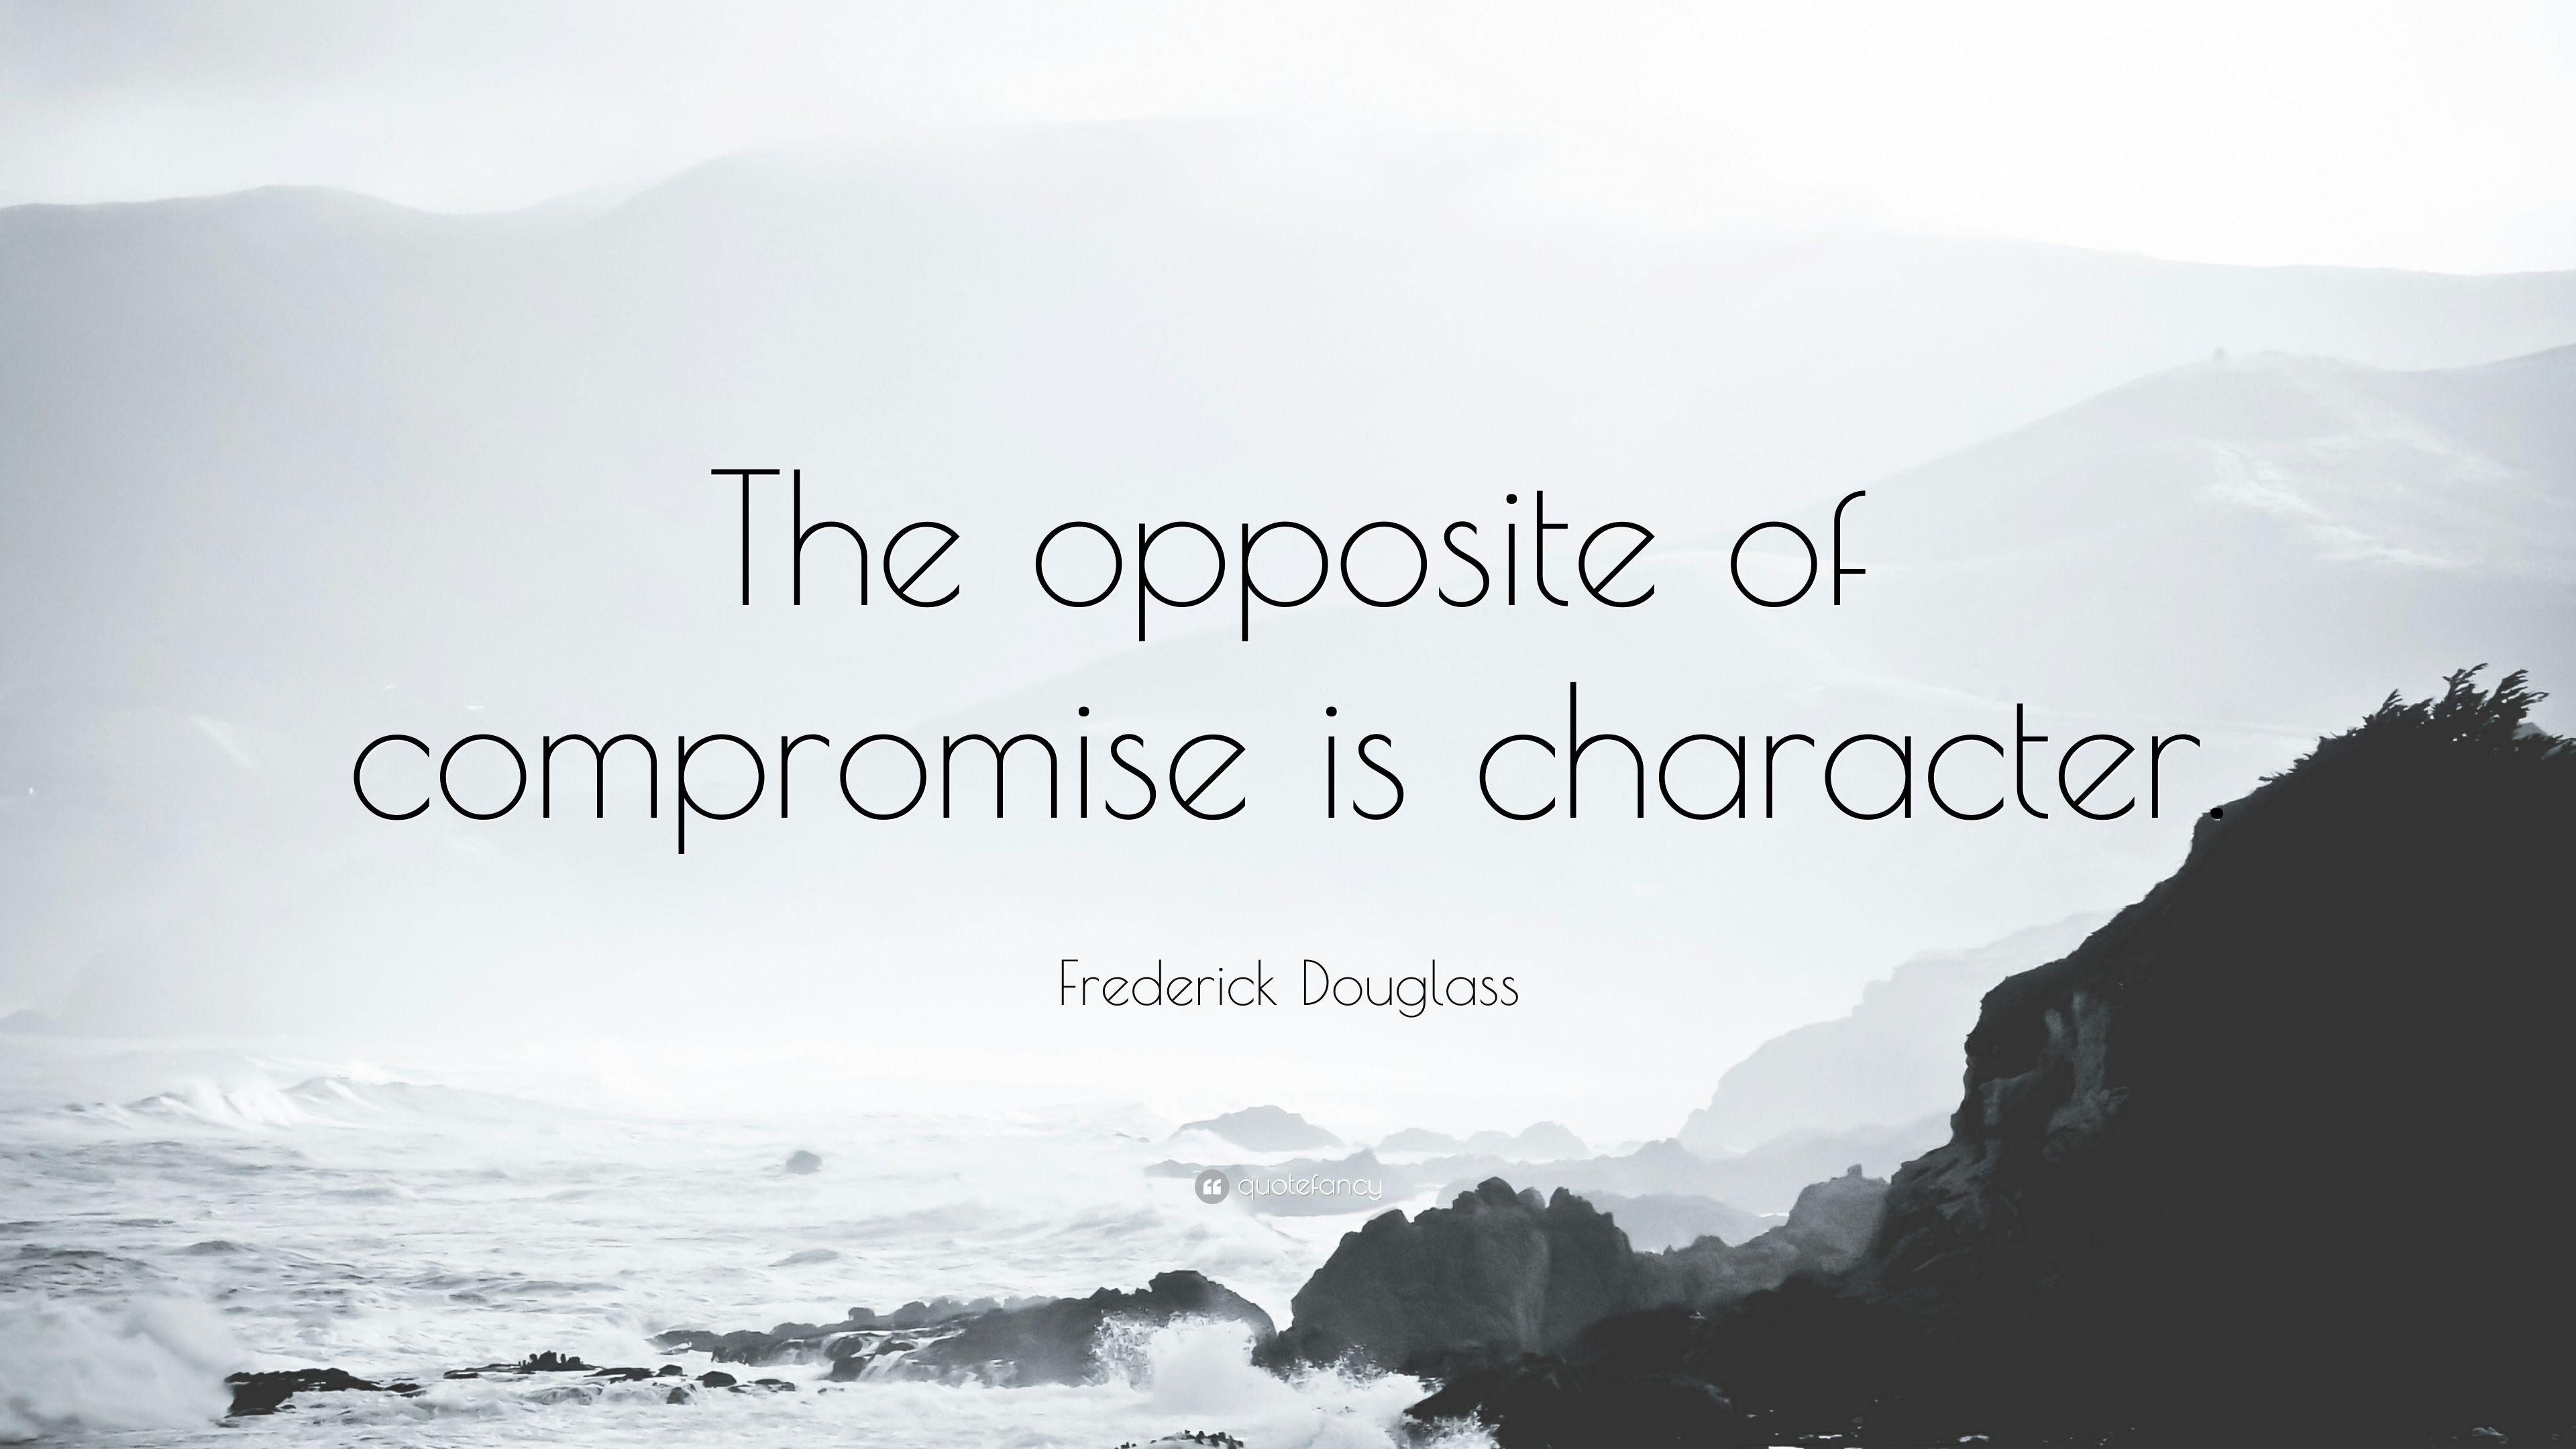 Frederick Douglass Quote: “The opposite of compromise is character